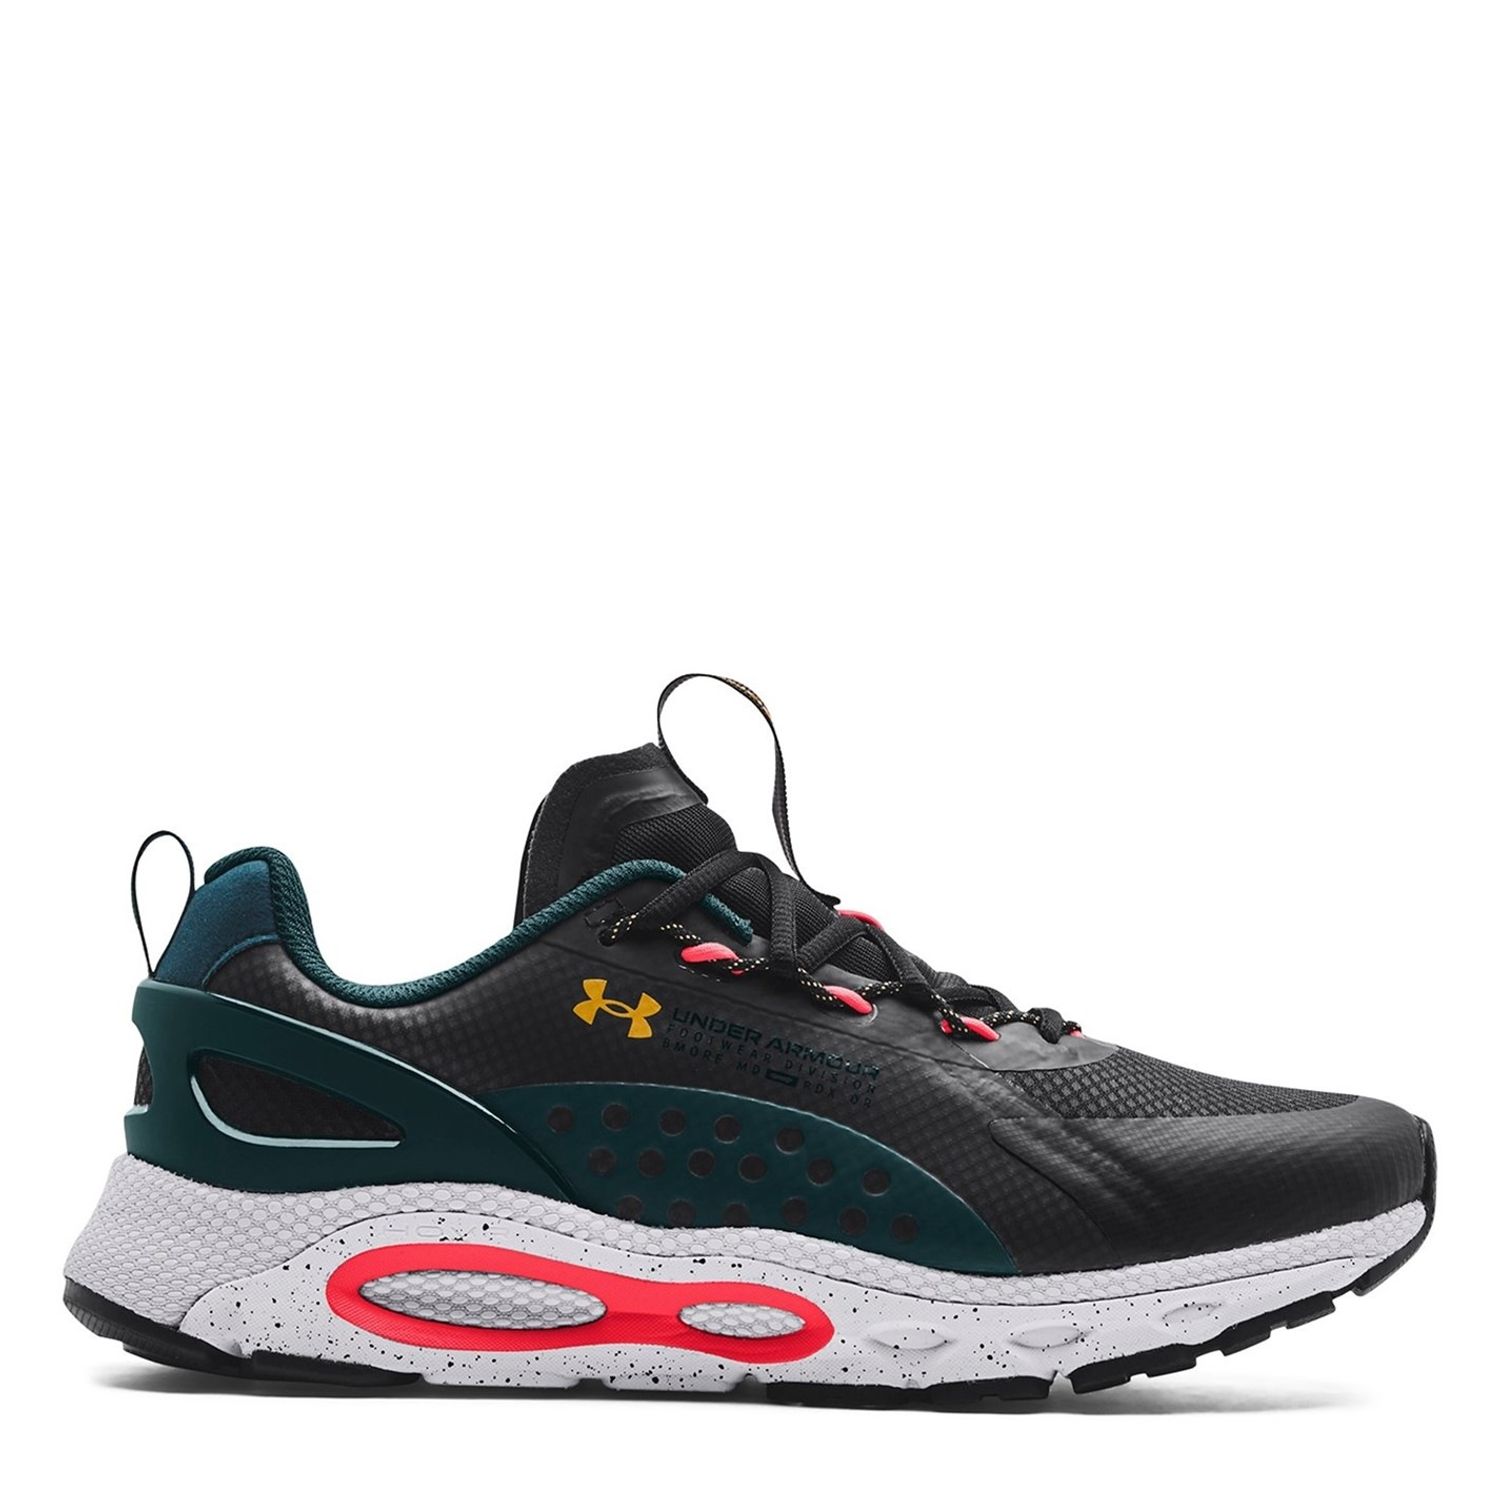 Black Under Armour Hovr Infinite Summit 2 Trainers - Get The Label